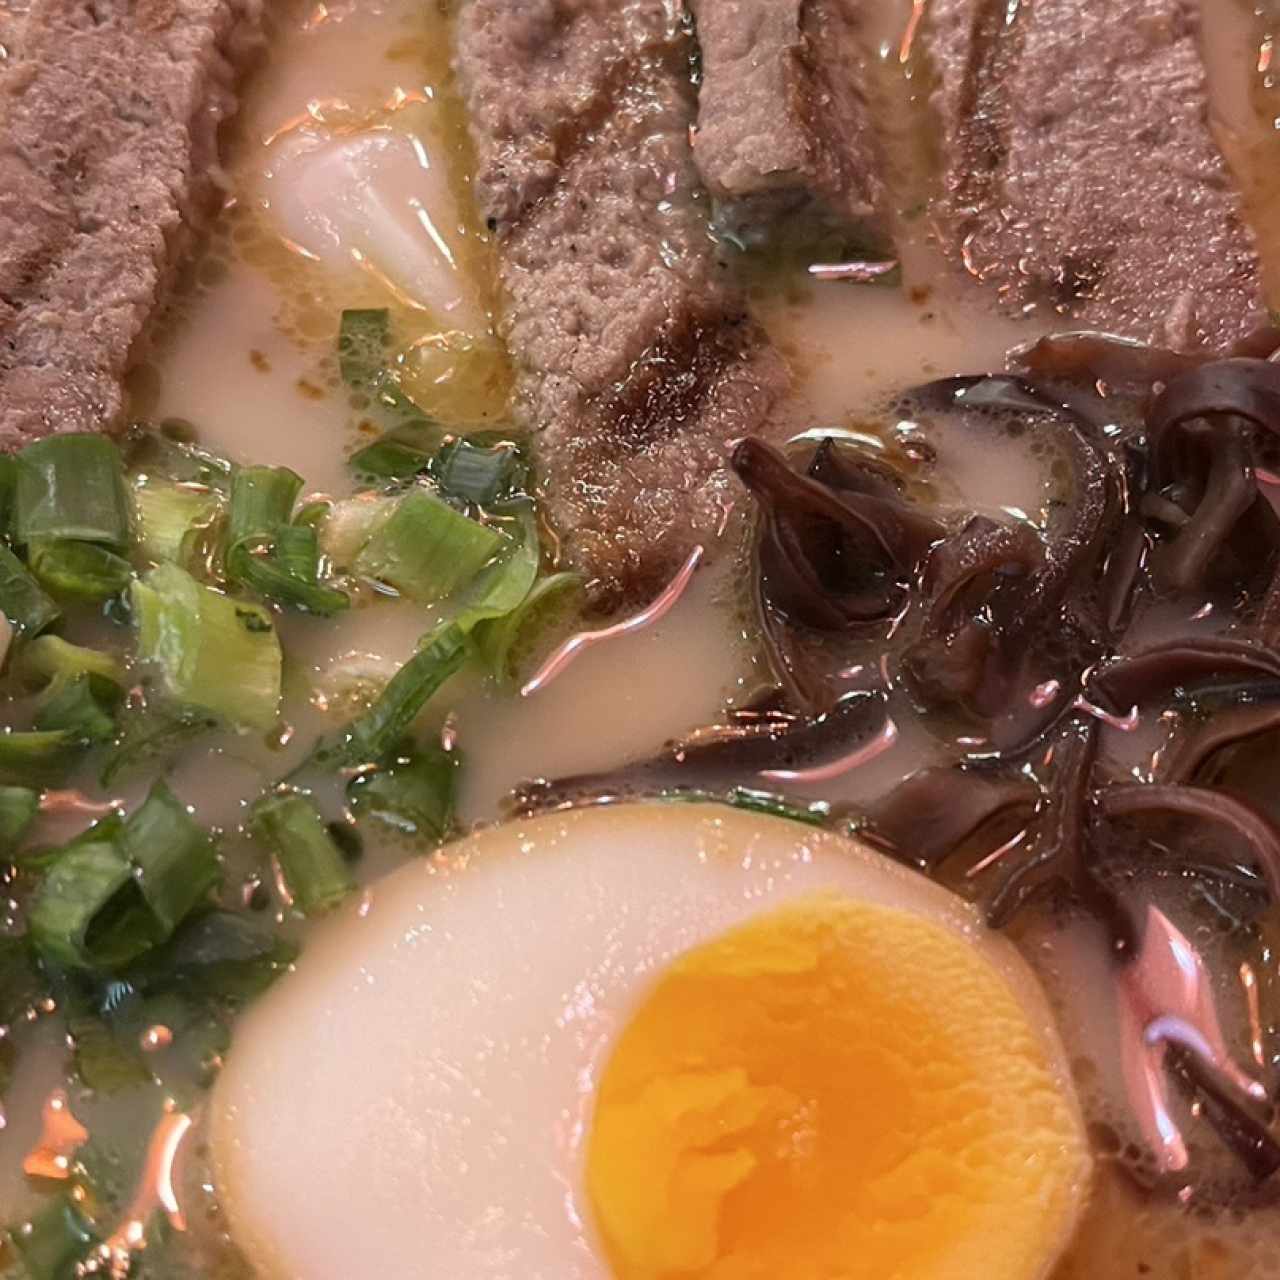 FIDEOS - CHARGRILLED BEEF RAMEN